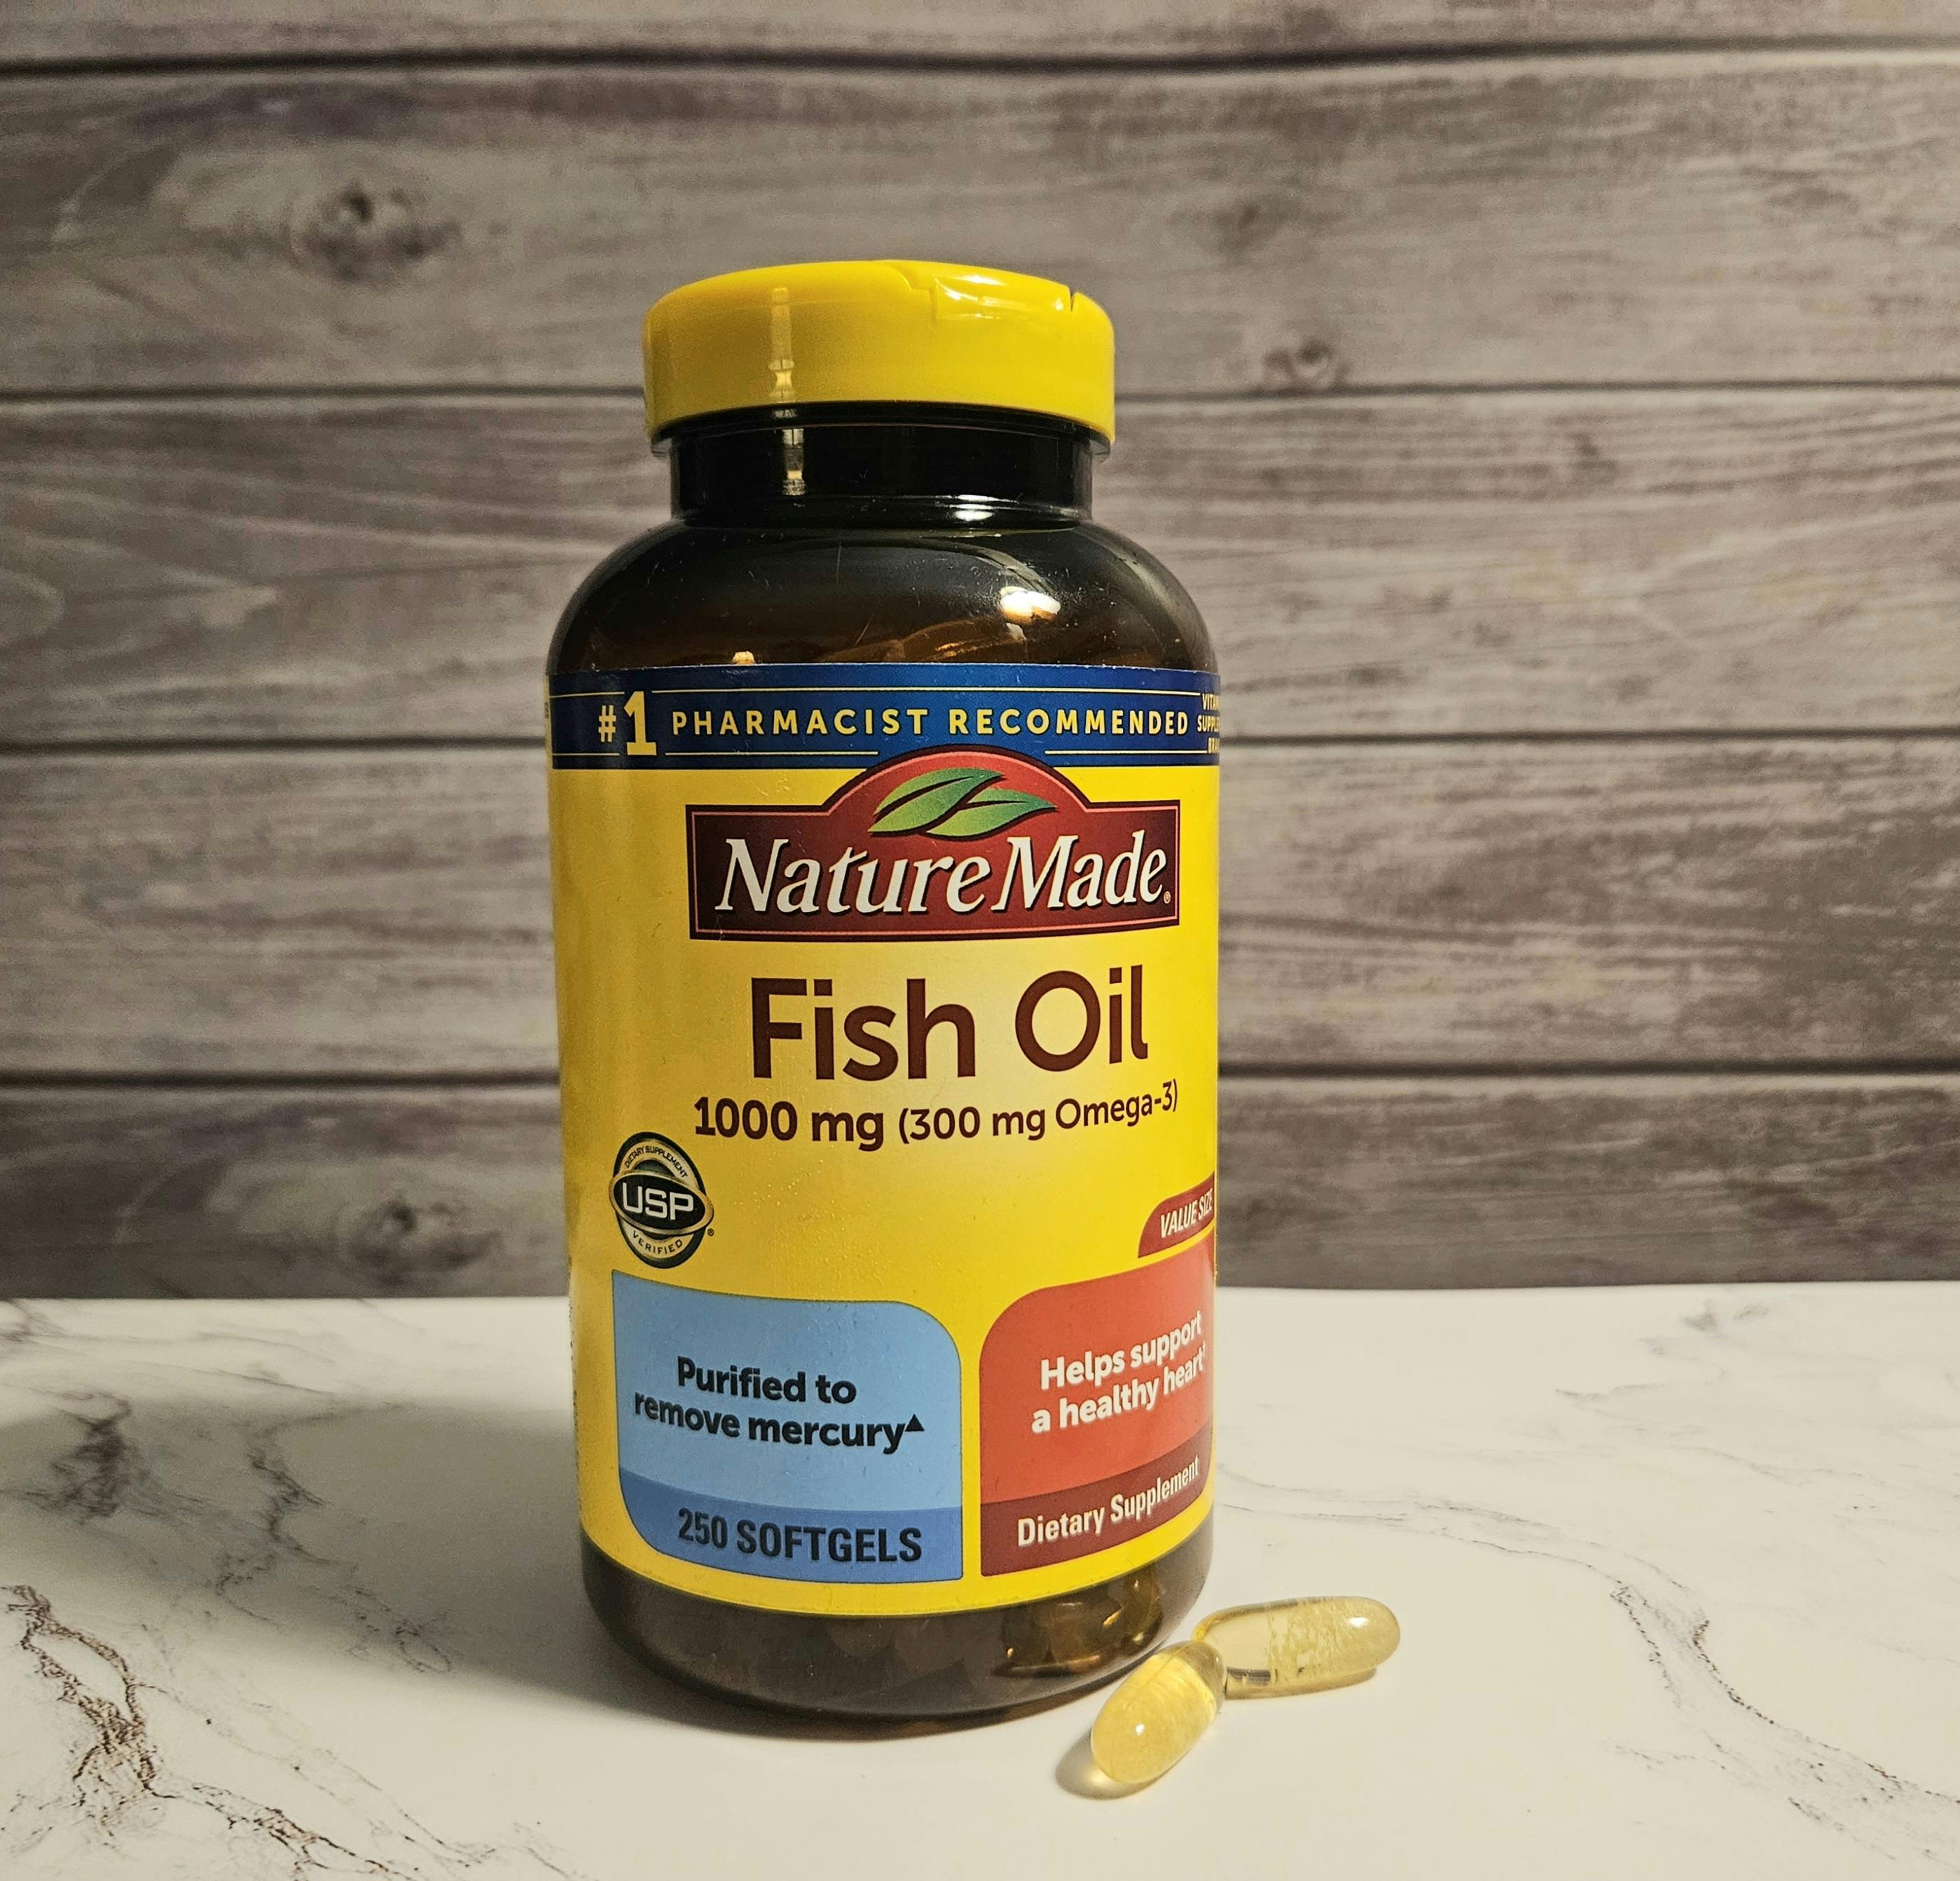 Fish Oil Vs. Omega-3: Which Is the Better Supplement Option